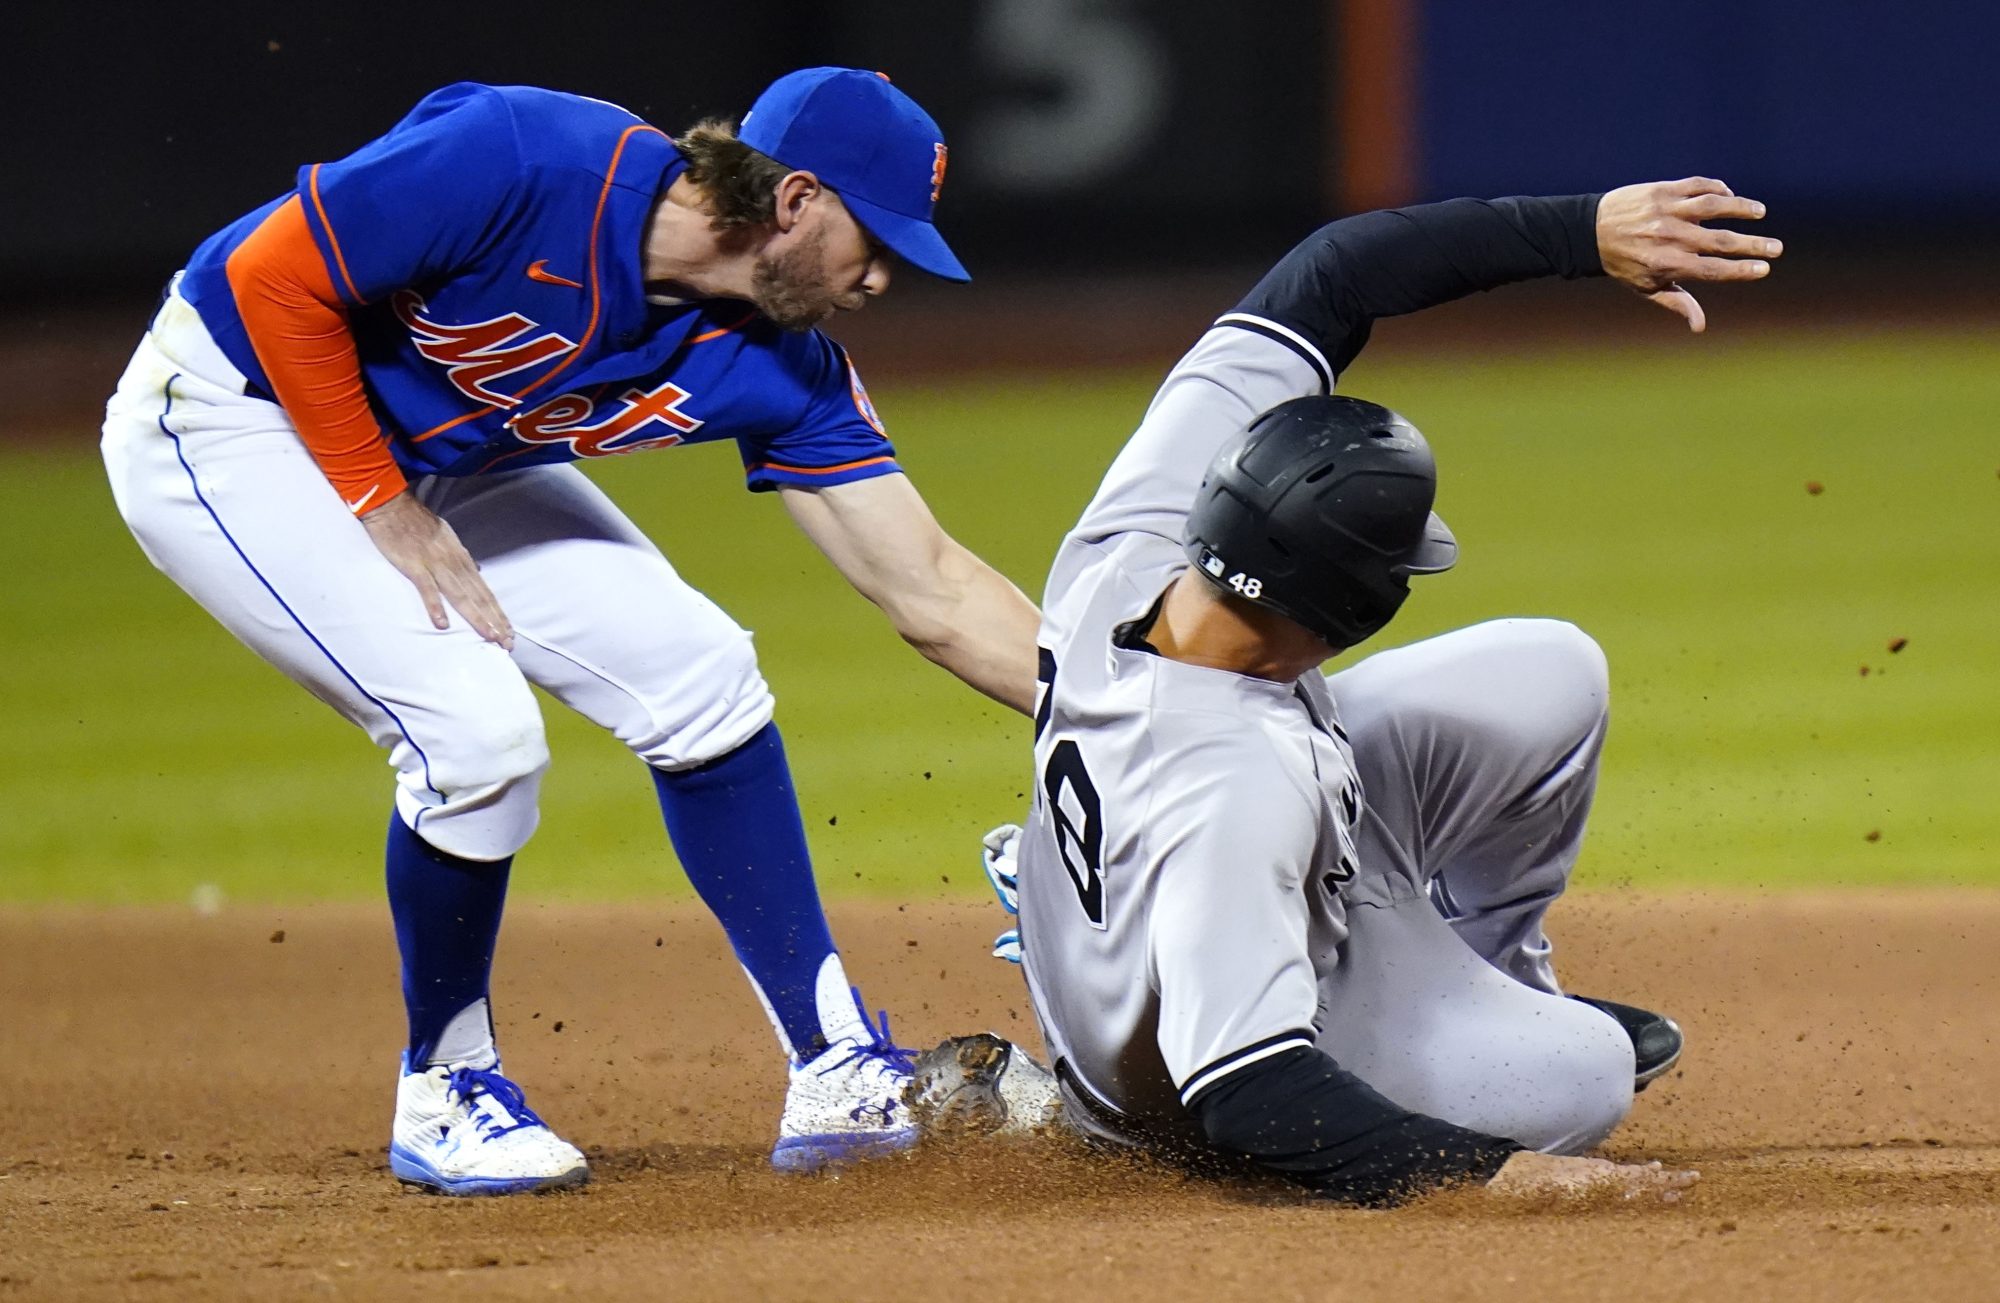 Anthony Rizzo is tagged out by Jeff McNeil after attempting a double steal in the seventh inning of the Yankees' 6-3 loss to the Mets.